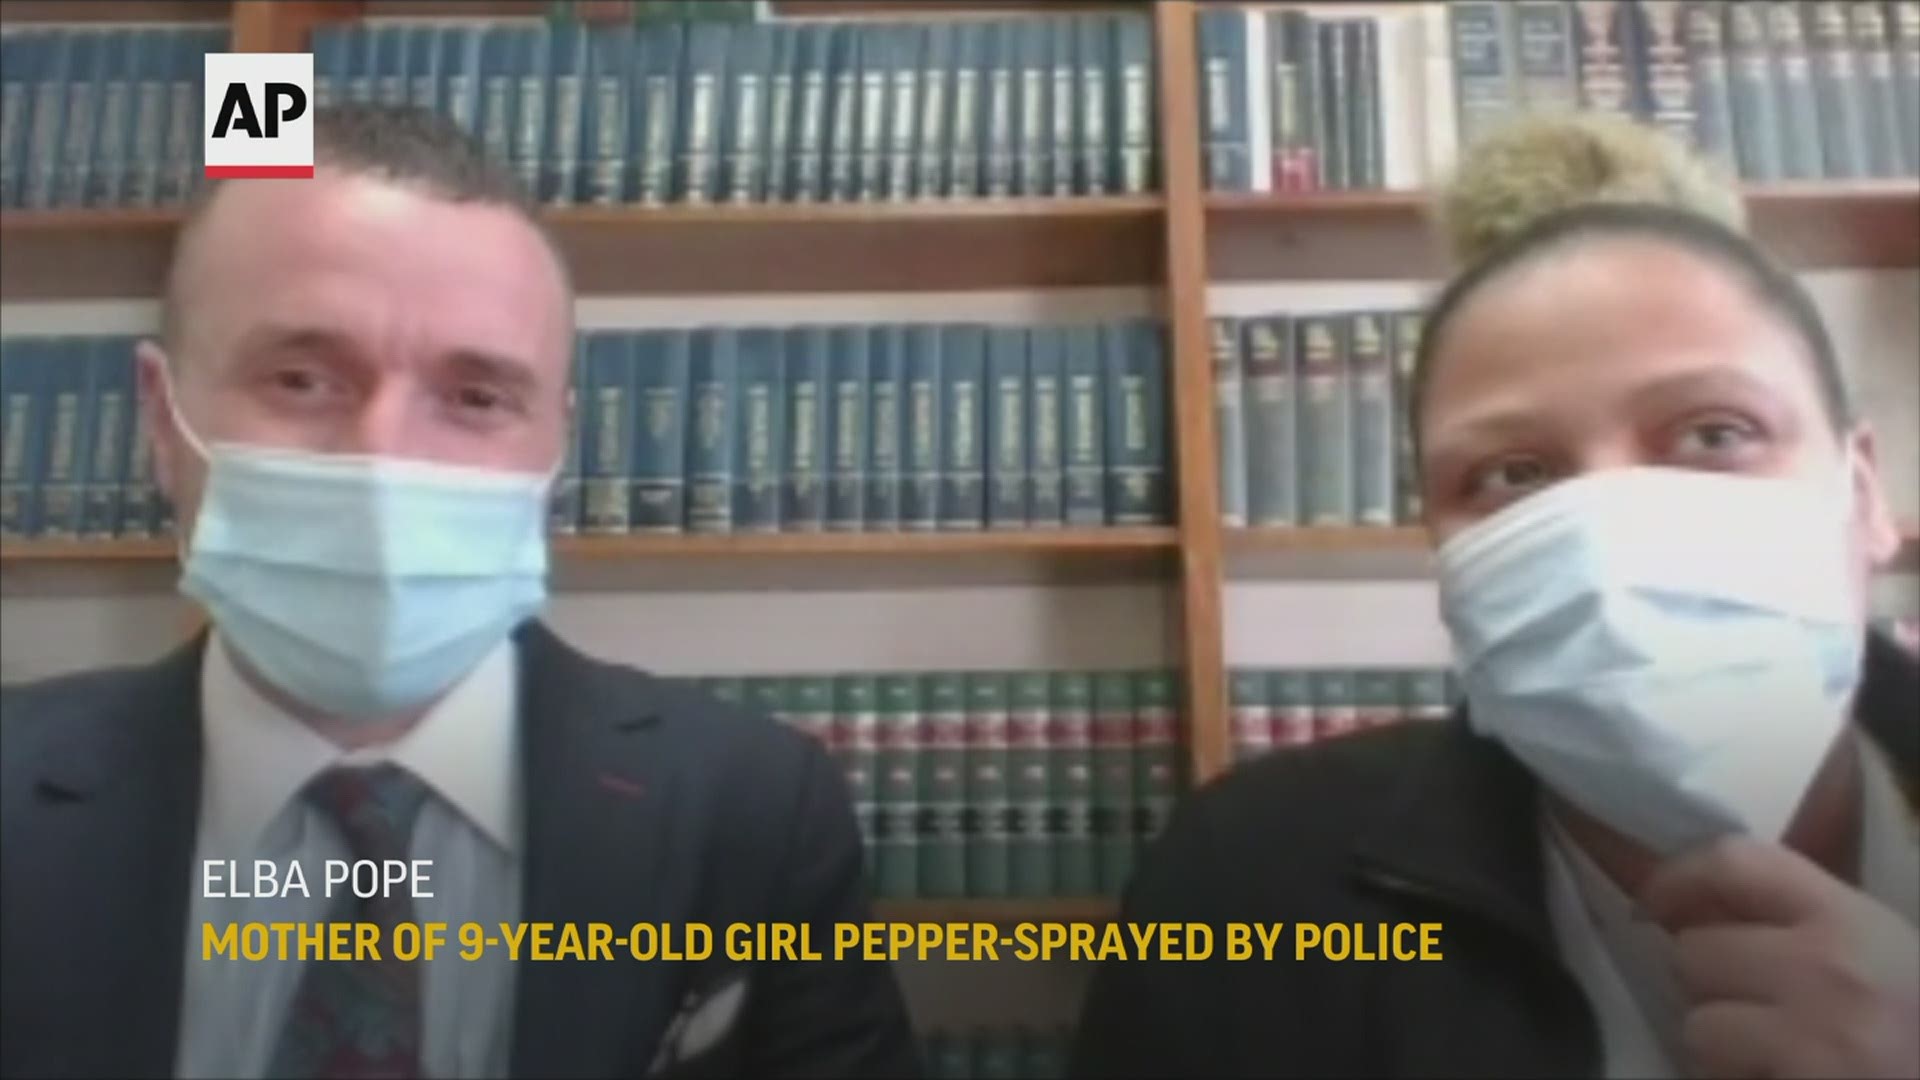 A 9-year-old Black girl who was handcuffed and pepper-sprayed by police typically is "a giant teddy bear" who loves music and playing video games, says mother